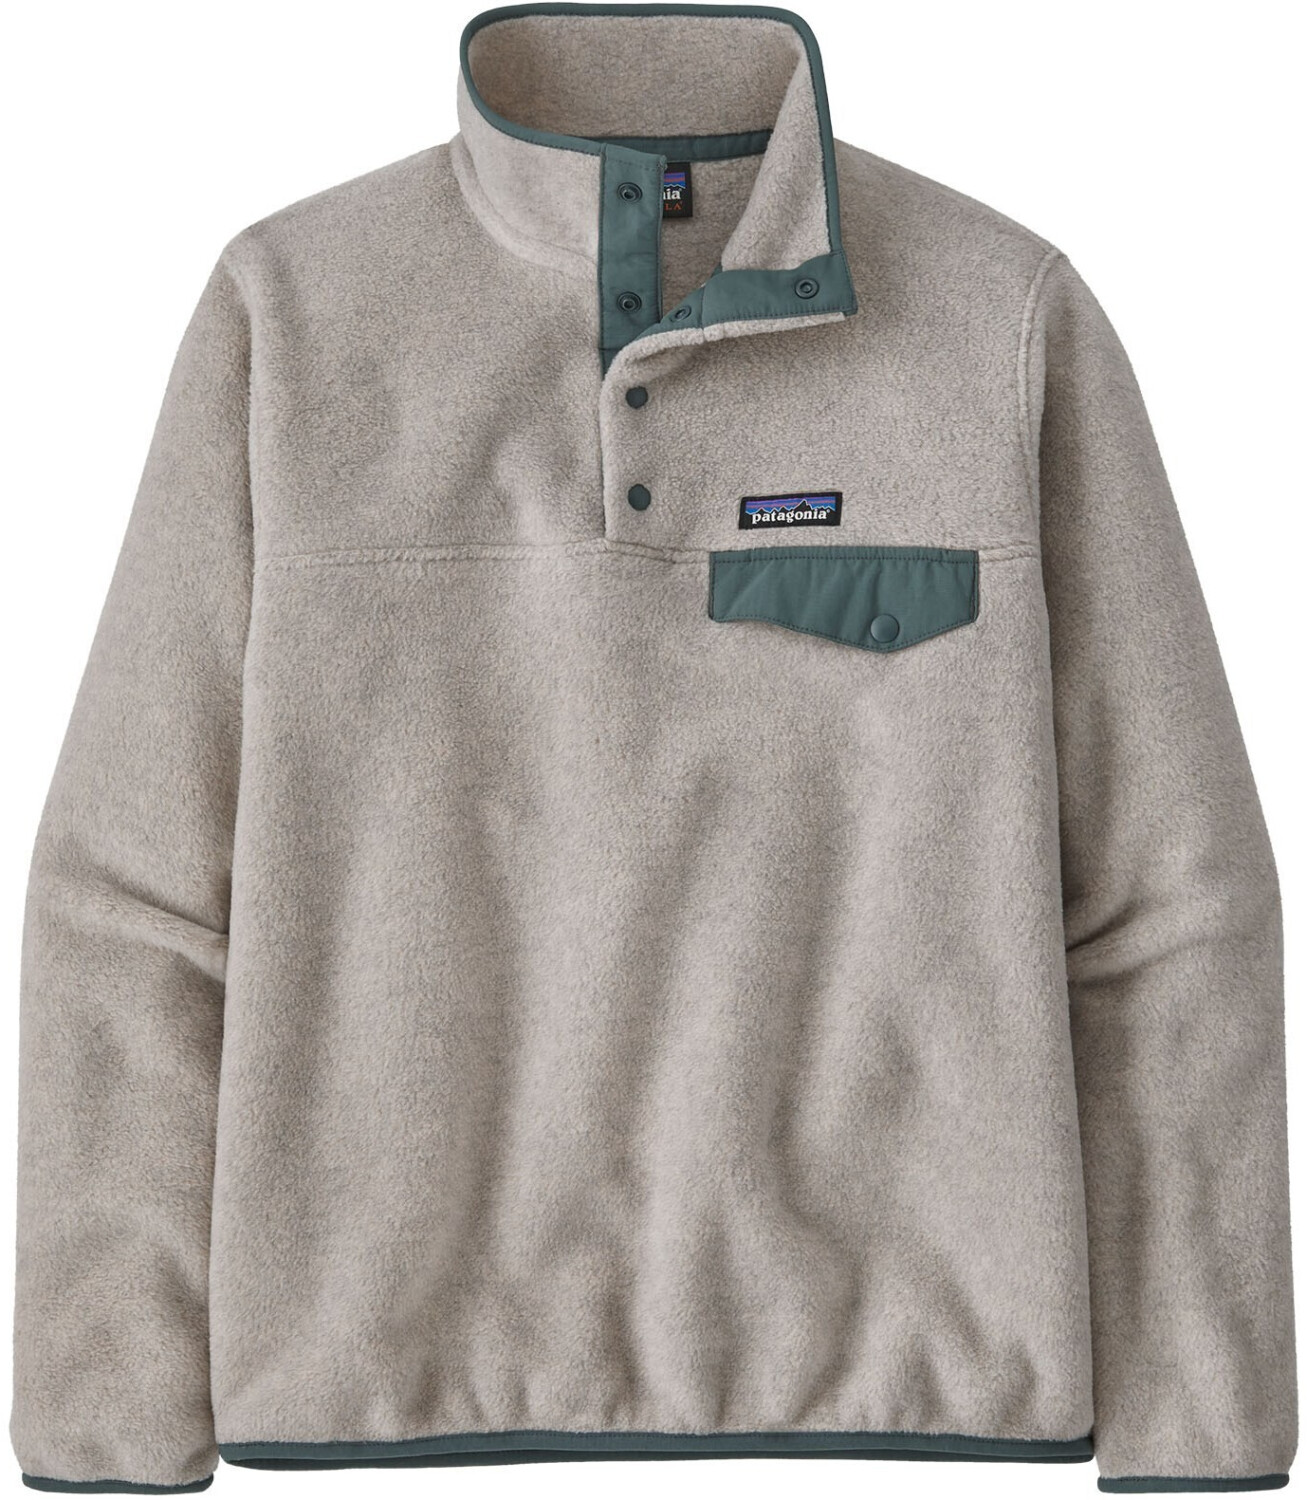 Image of Patagonia Women's Lightweight Synchilla Snap-T Fleece Pullover (25455) oatmeal heather w/nouveau green